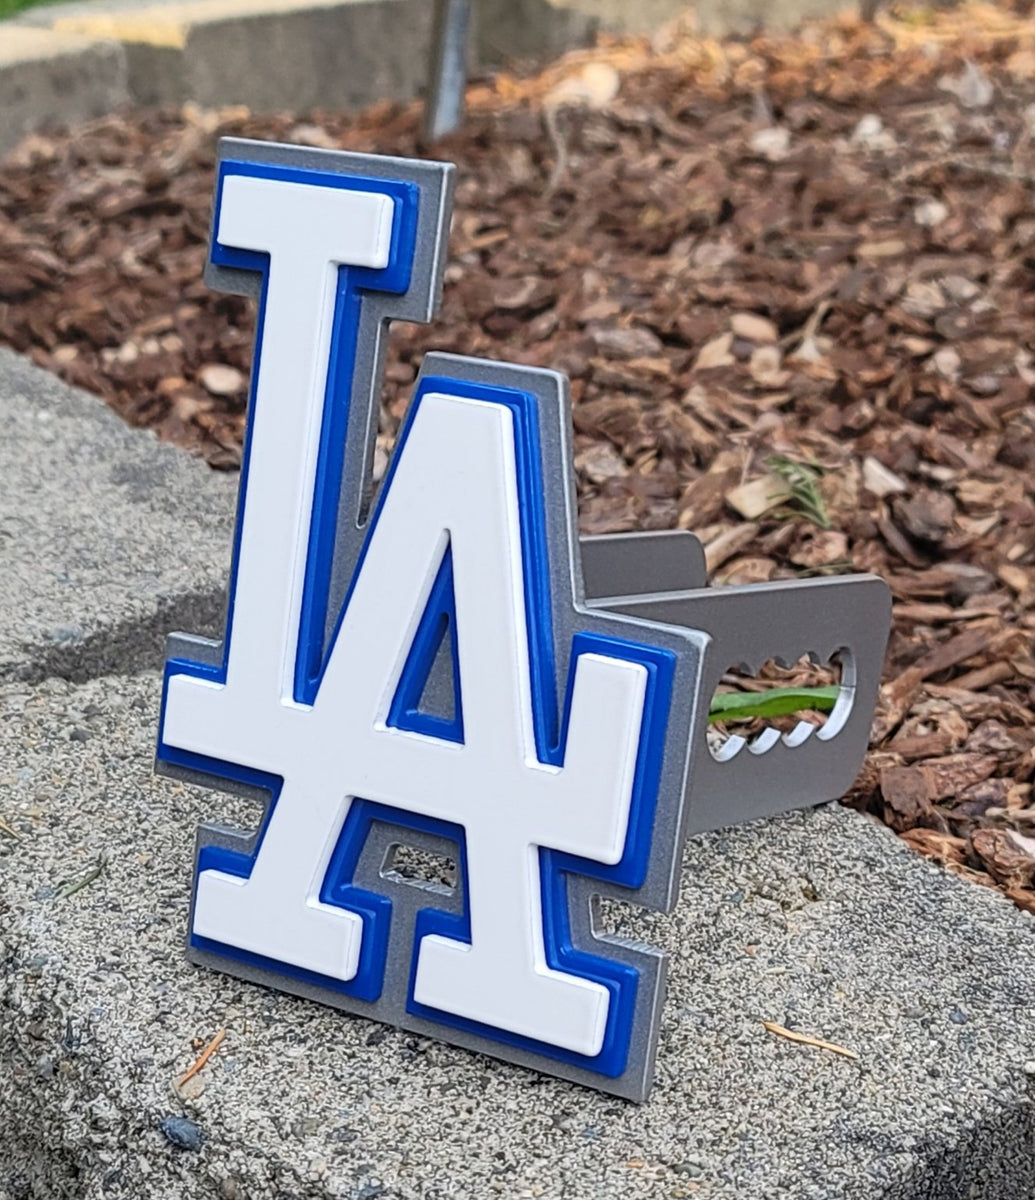 Los Angeles Dodgers Hitch Cover - Black